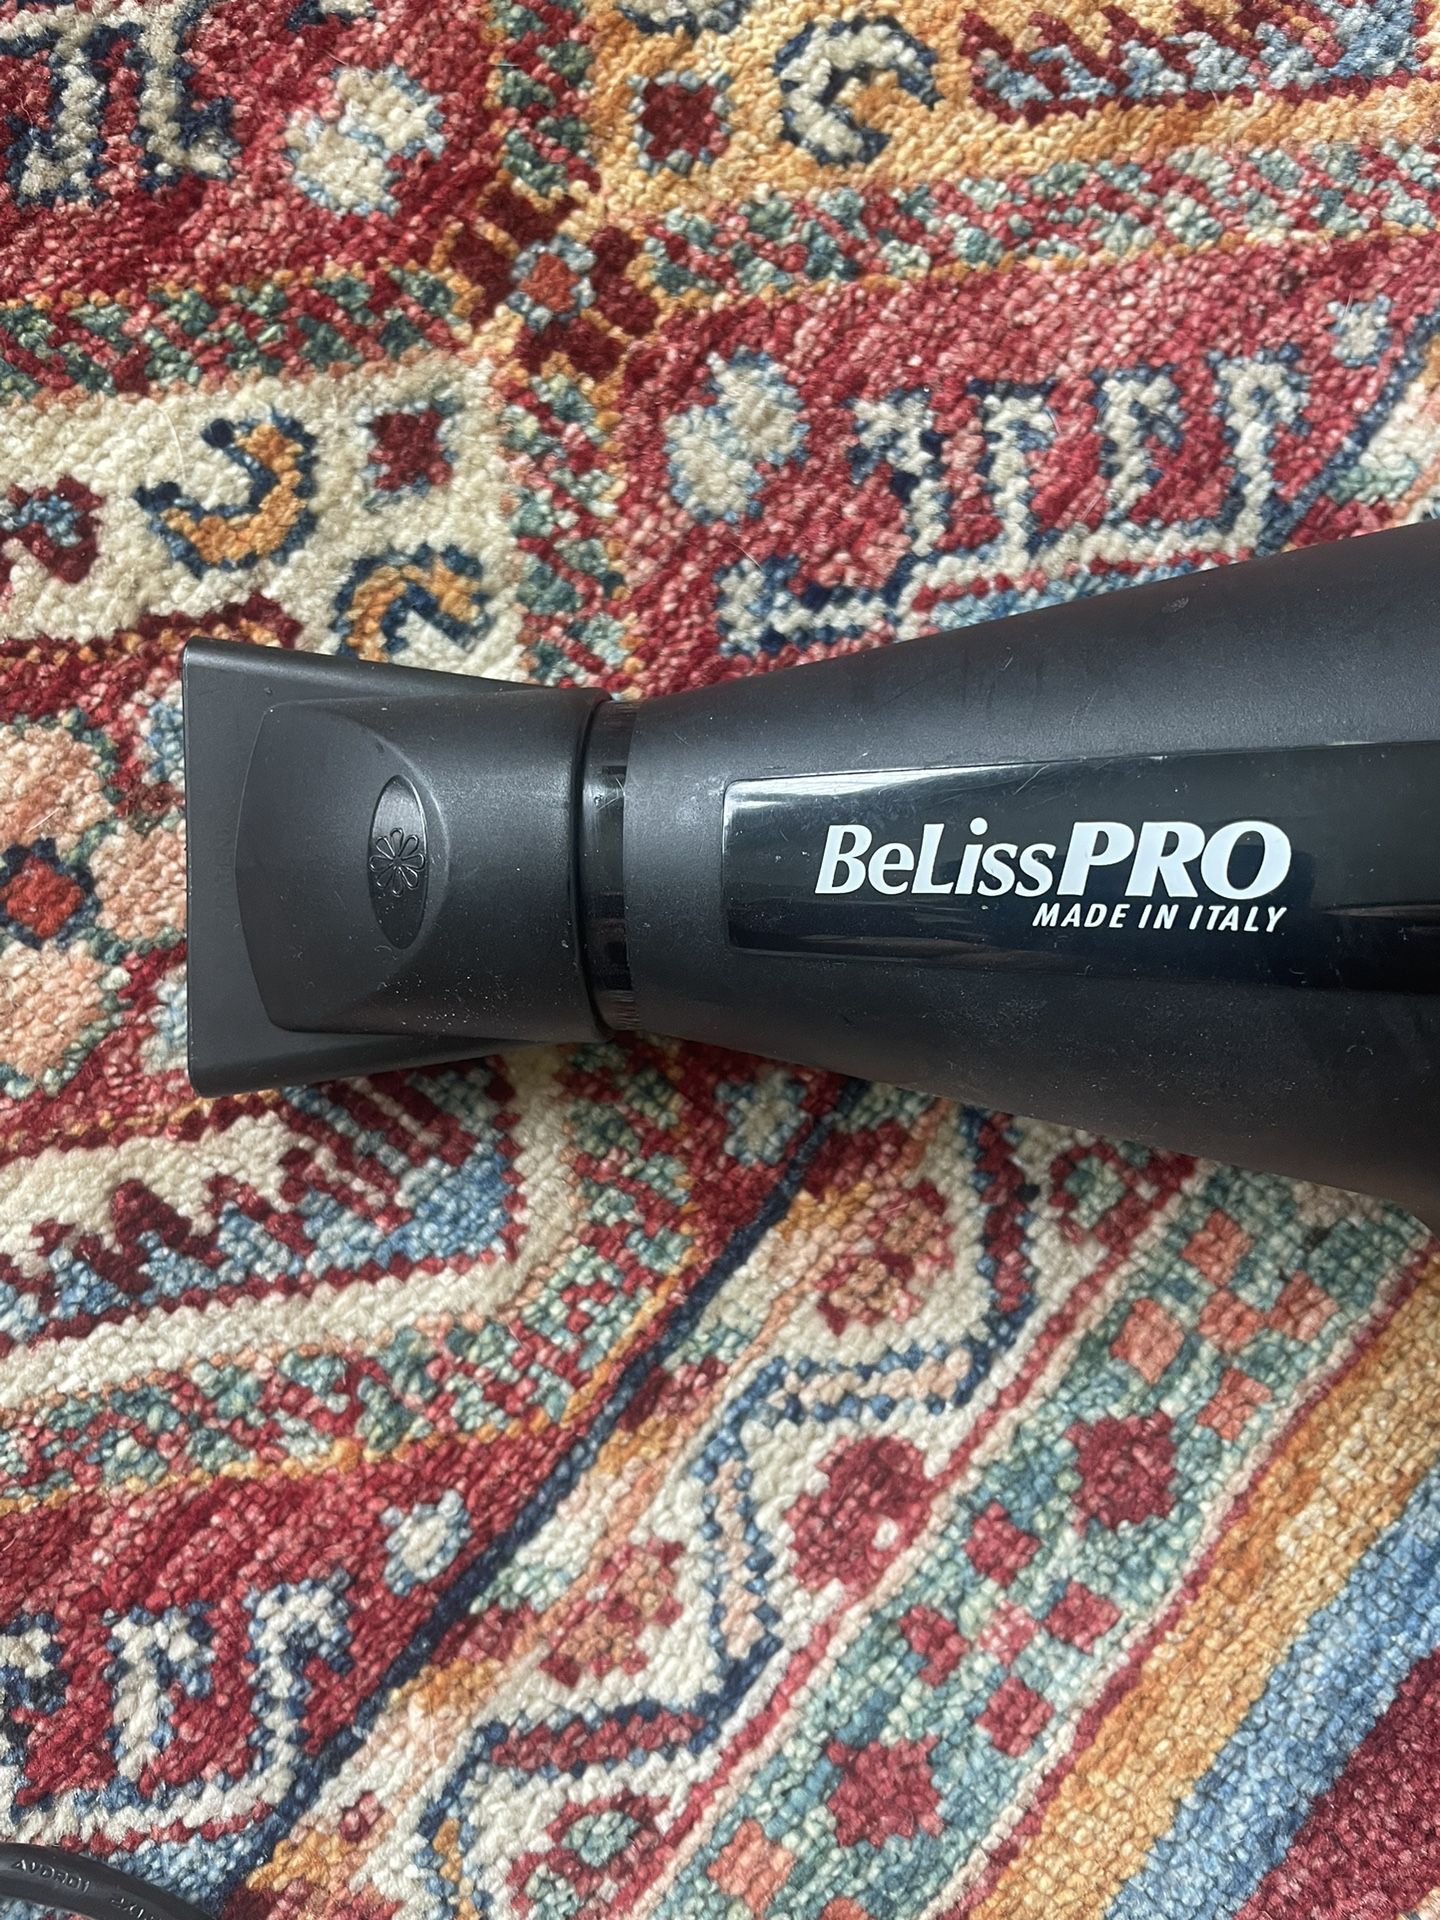 BeLiss Pro Hairdryer - MADE IN ITALY